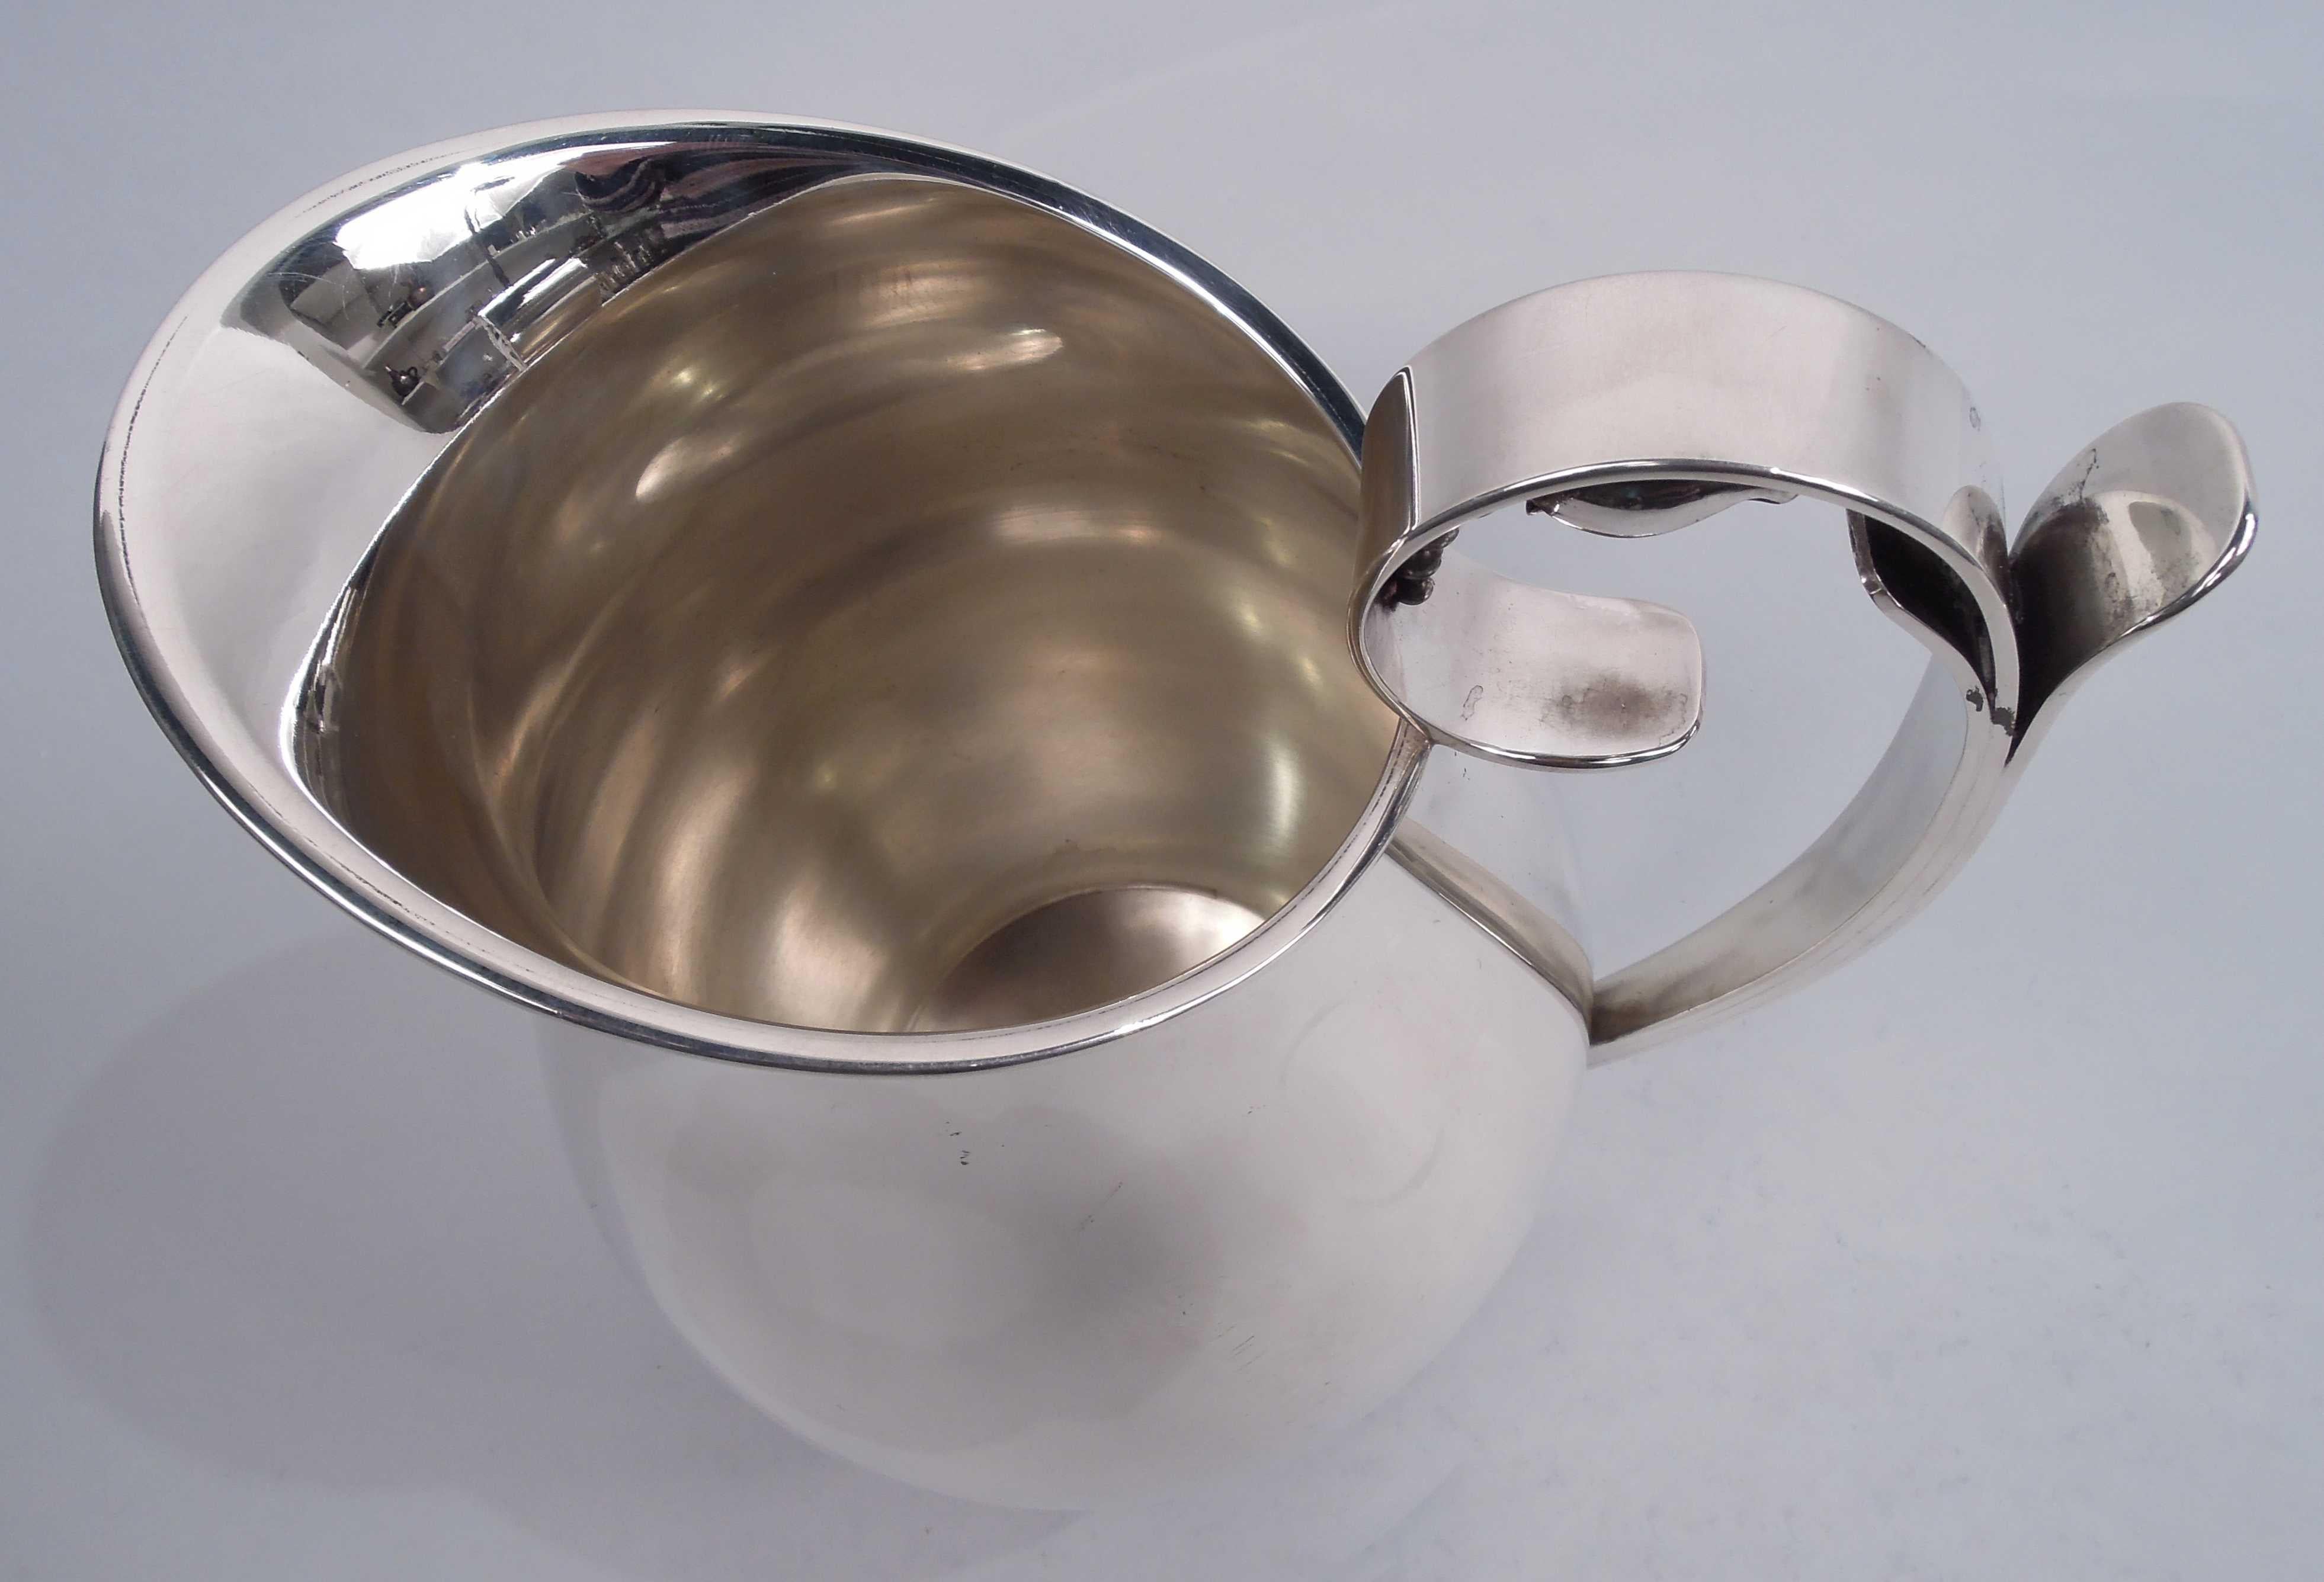 Midcentury Modern sterling silver water pitcher. Made by Alphonse La Paglia (d. 1953) in New Jersey. Baluster with asymmetrical oval mouth; stepped and round foot ring with flat beading. High-looping handle wrapped with abstract leaves; scroll